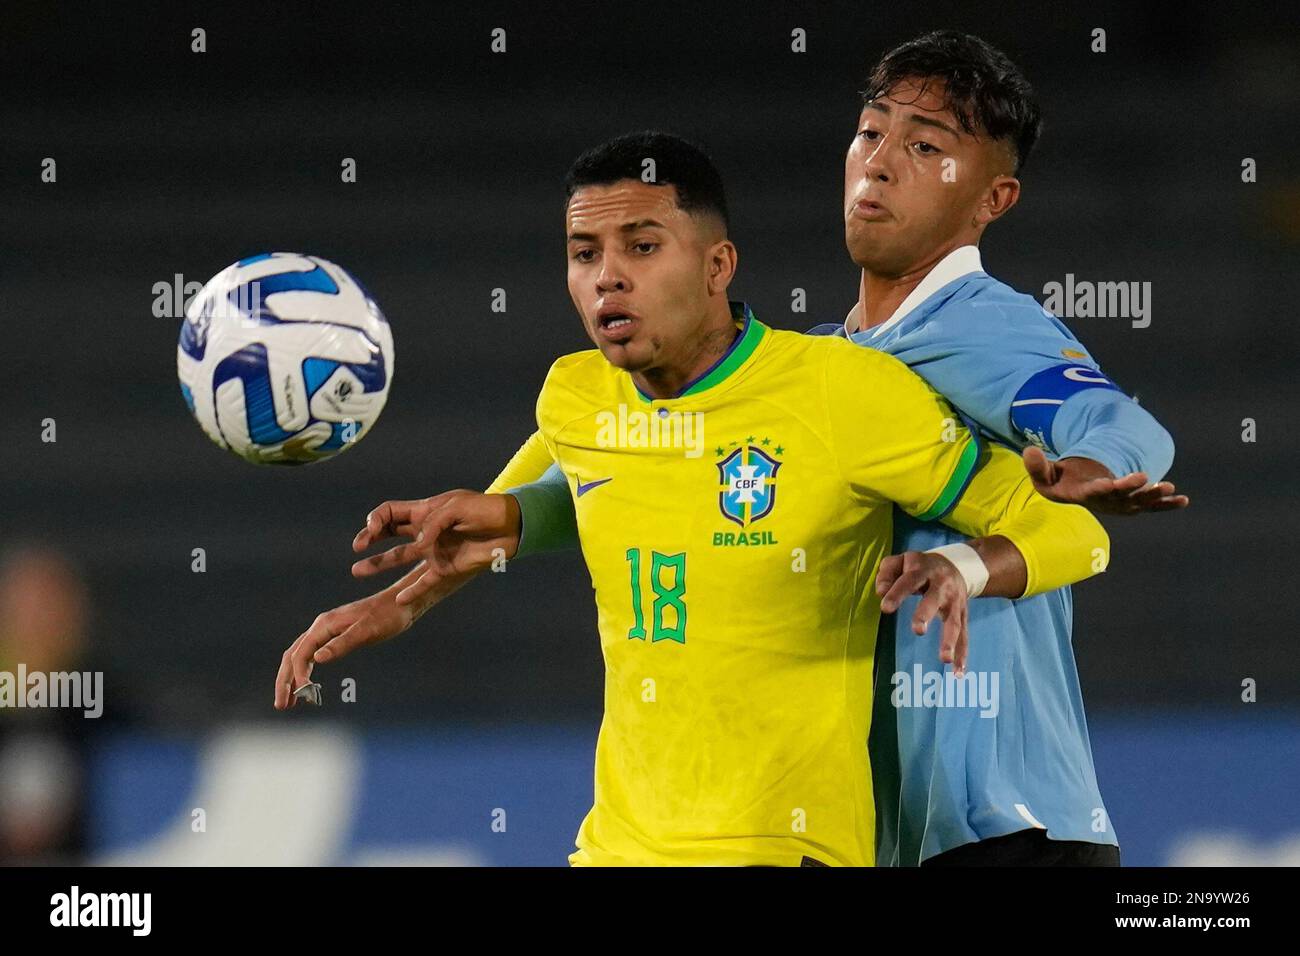 Alexsander of Brazil fights for the ball with Fabricio Diaz of News  Photo - Getty Images